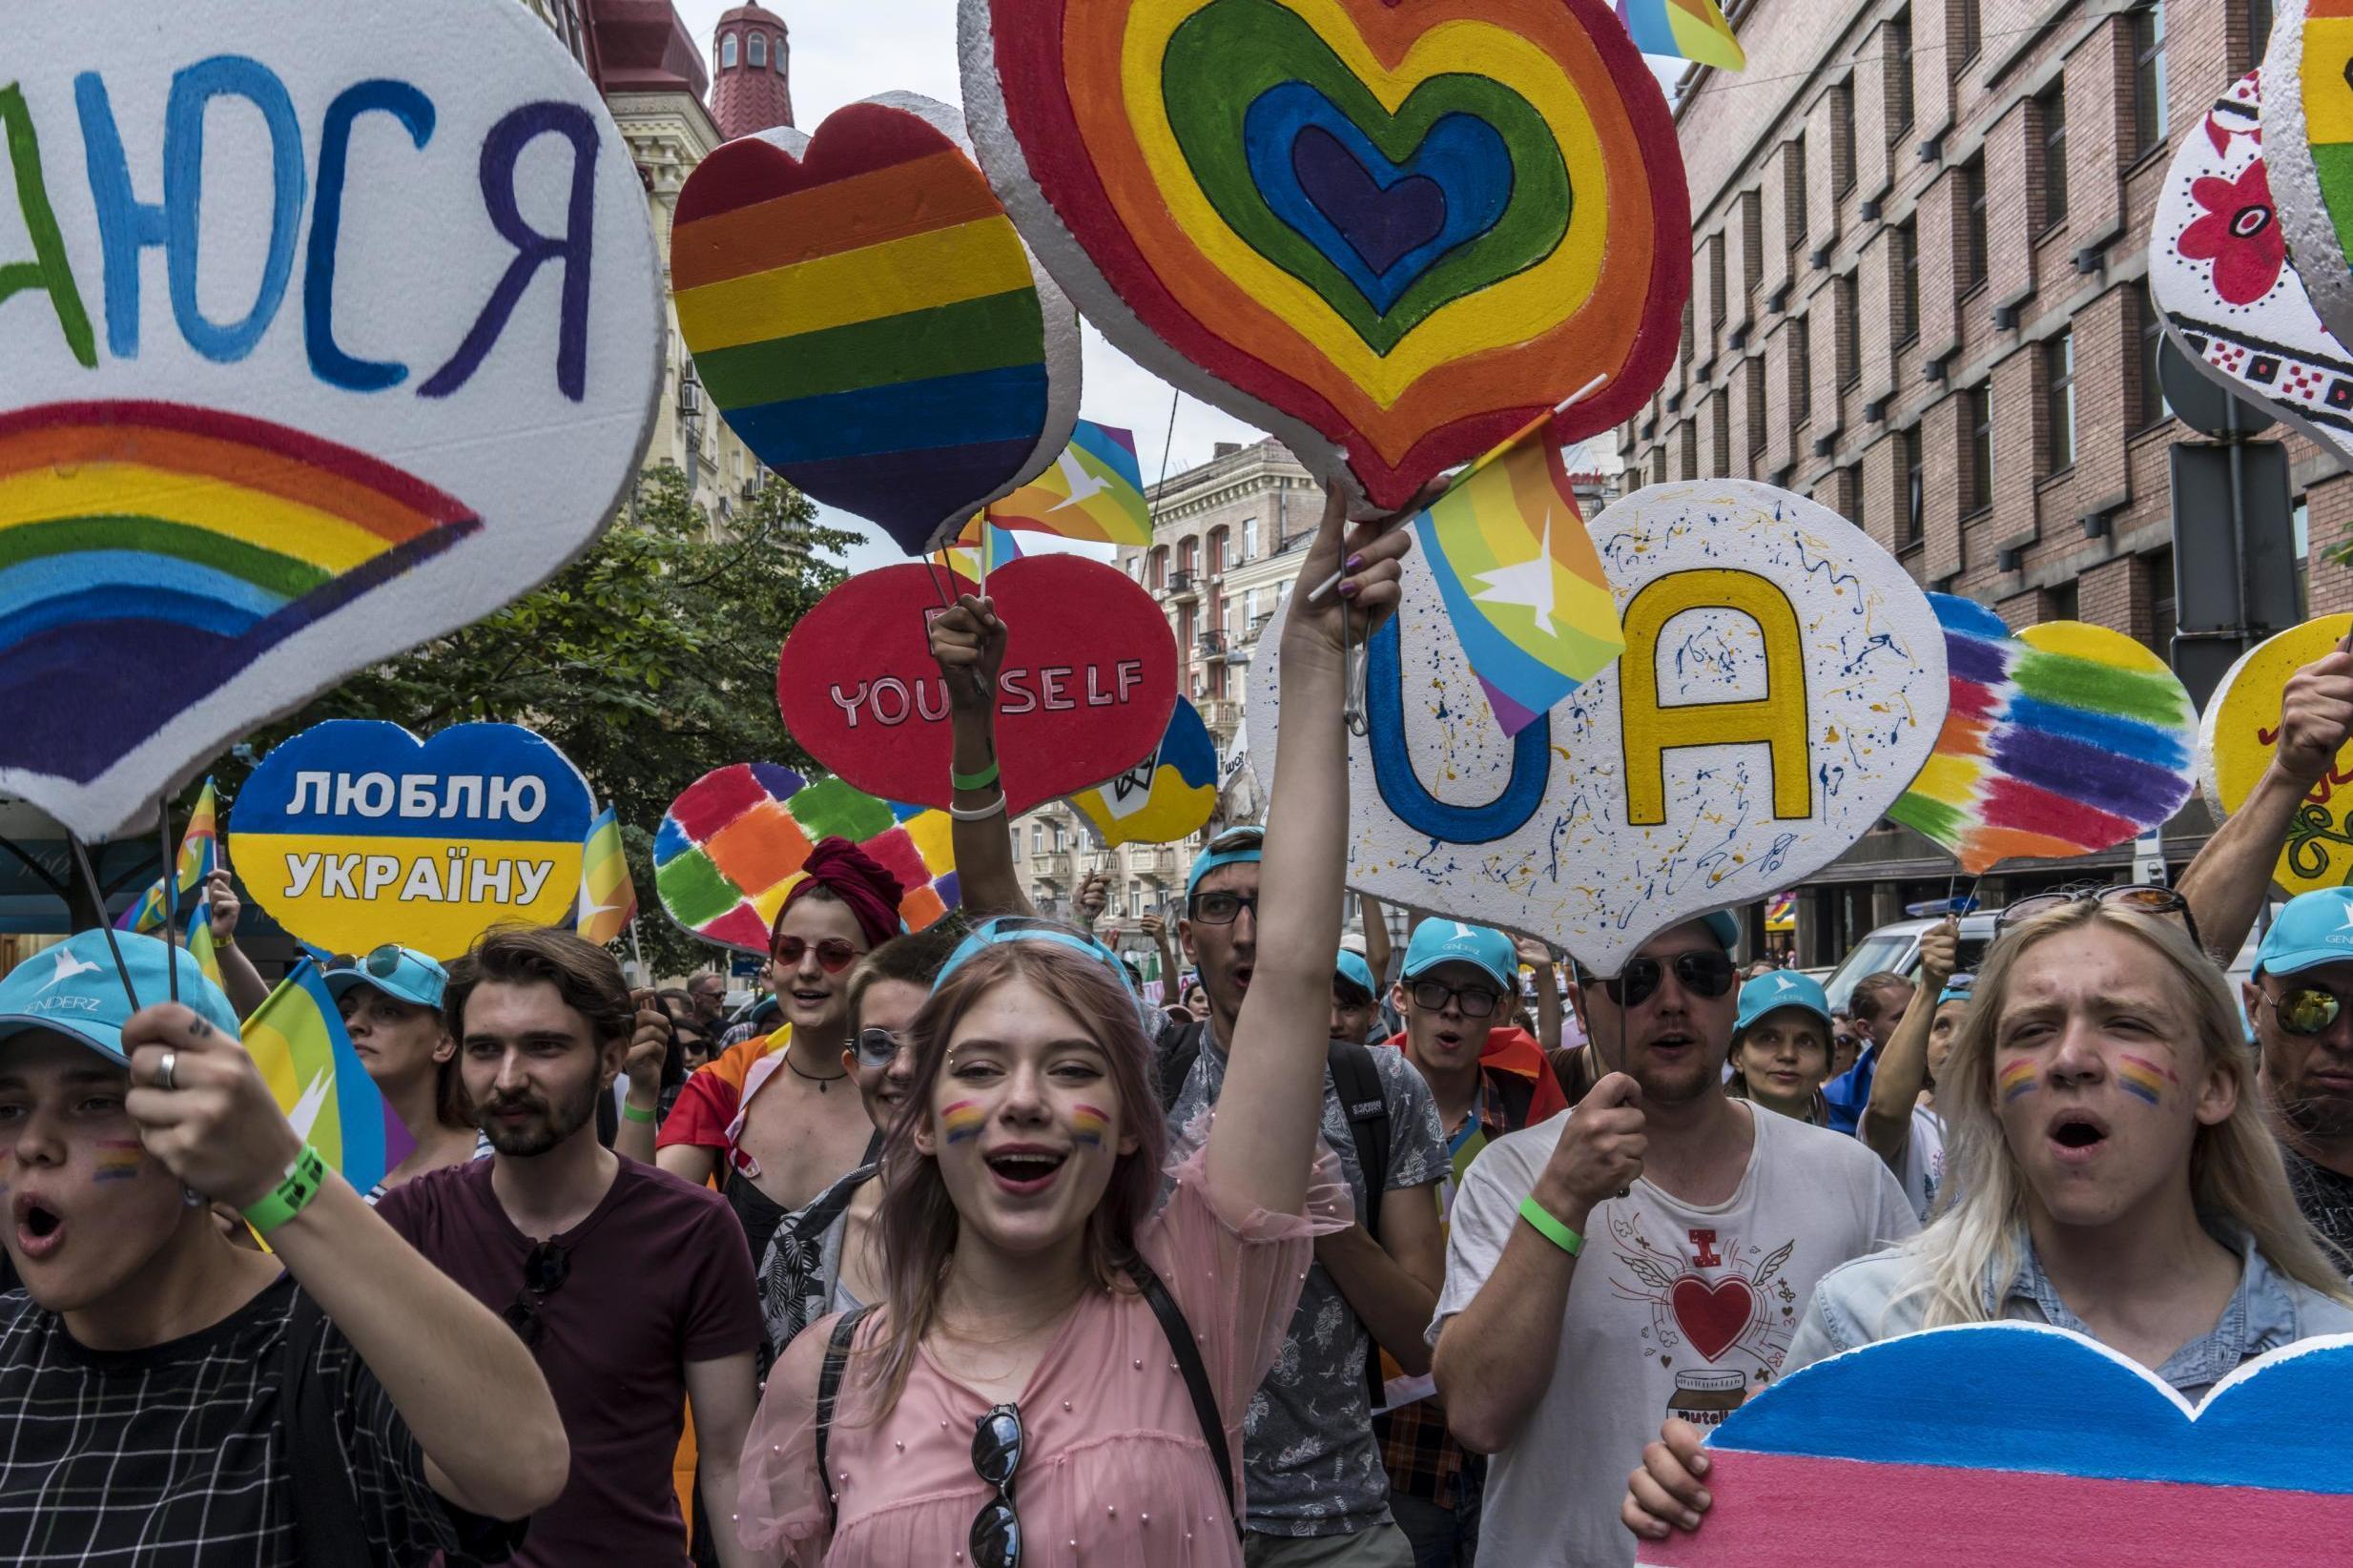 Ukraine holds country's largest ever gay pride parade